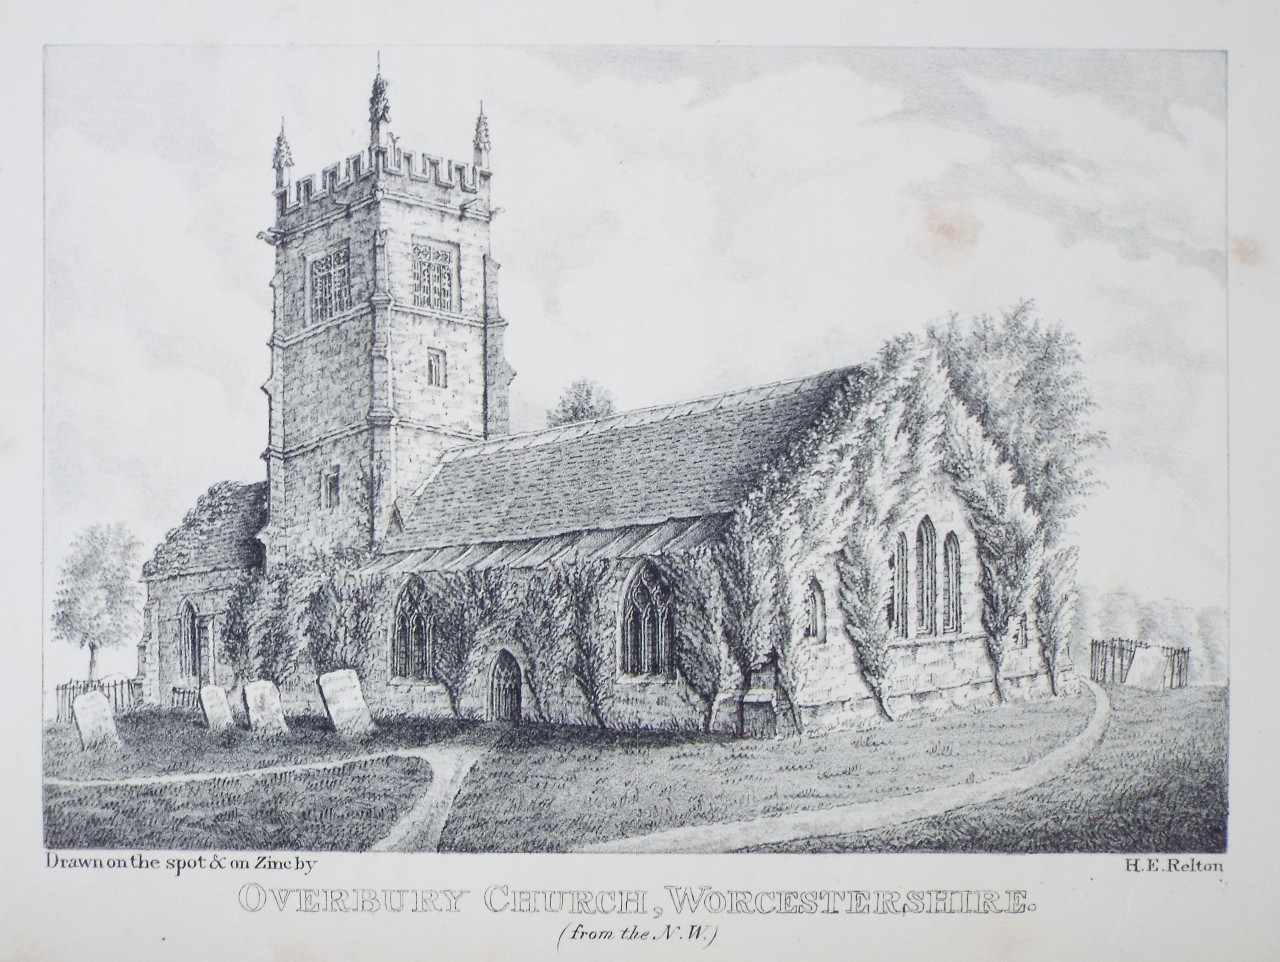 Zinc Lithograph - Overbury Church, Worcestershire. (from the N.W.) - Relton